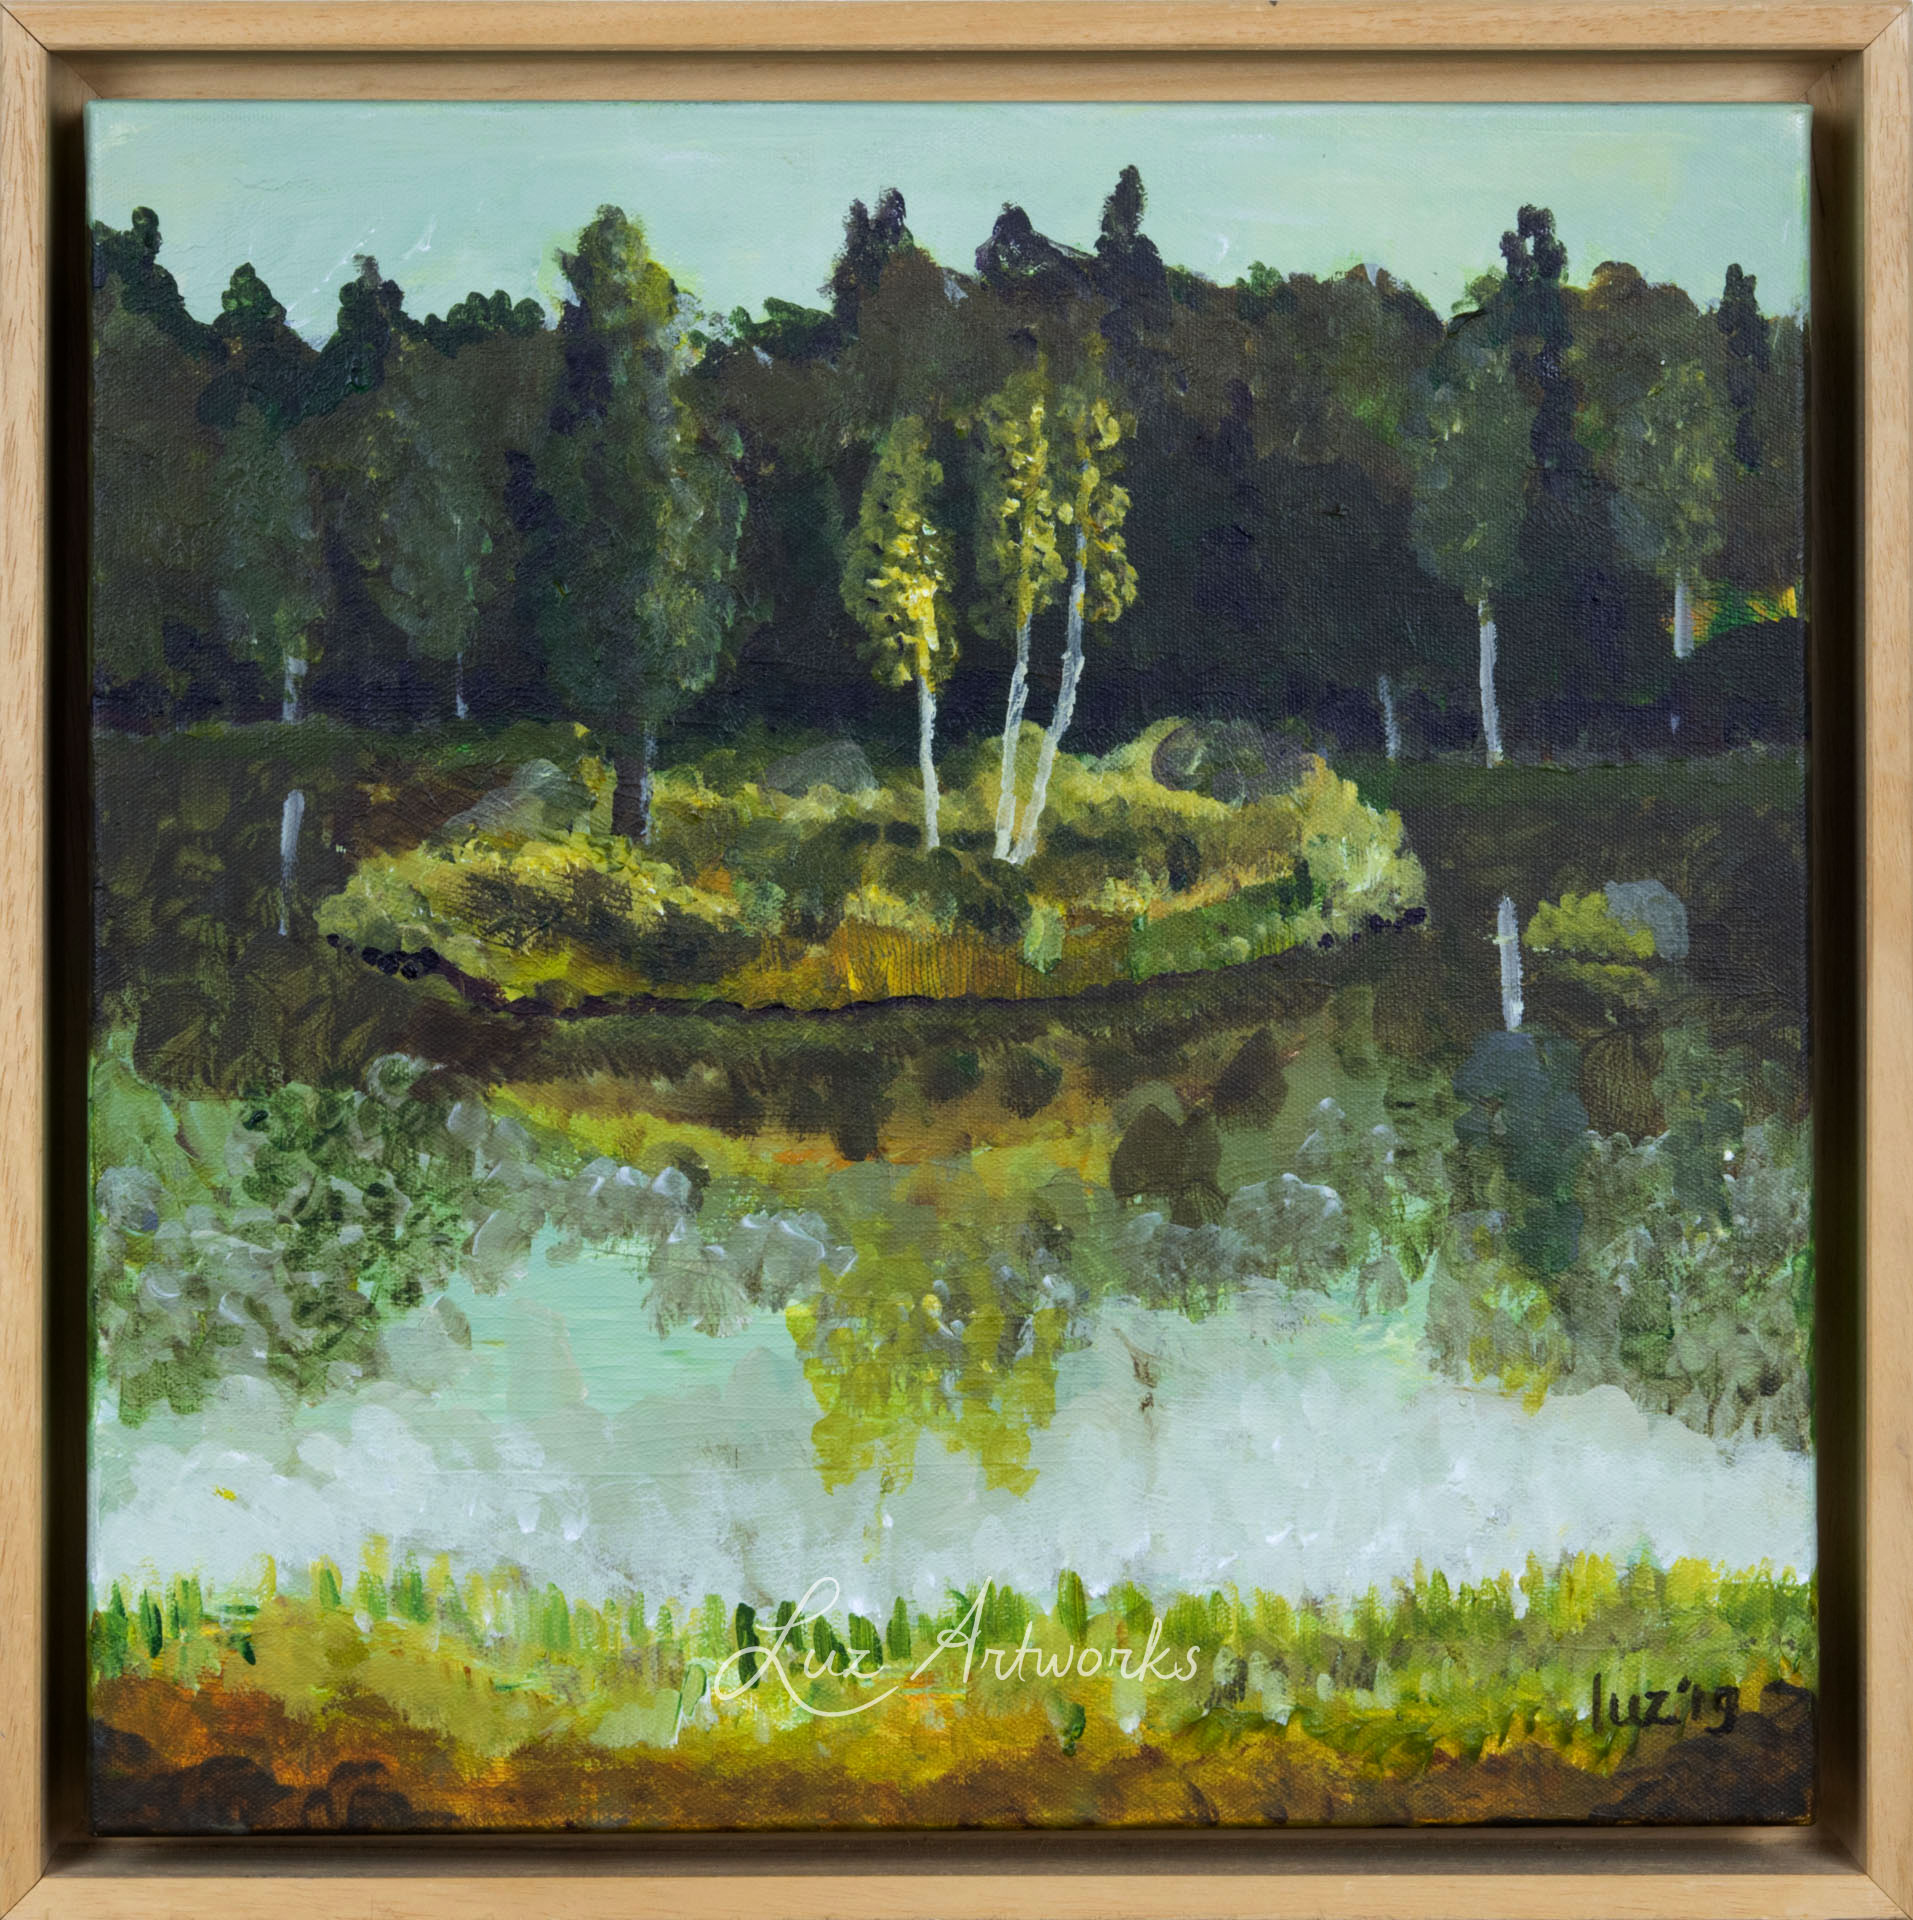 This image shows the painting Lake in Latvia by Luz / Marloes